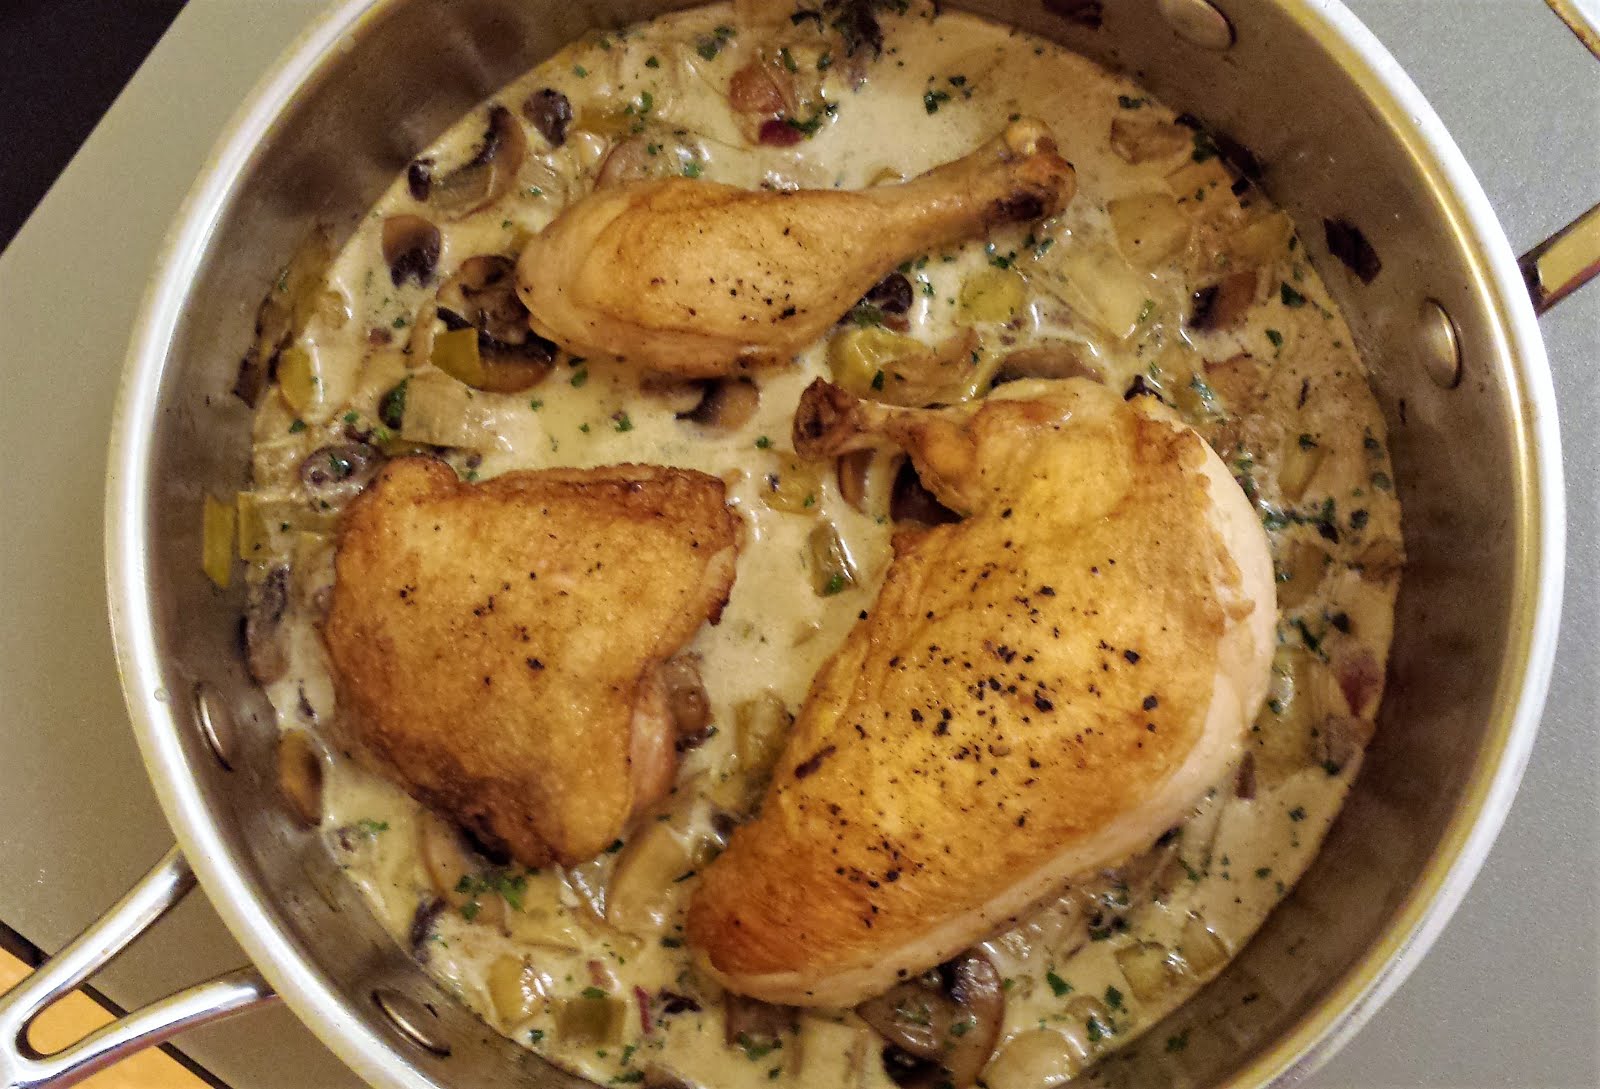 For Love of the Table: Coq au Riesling (Sautéed Chicken in Riesling Sauce)